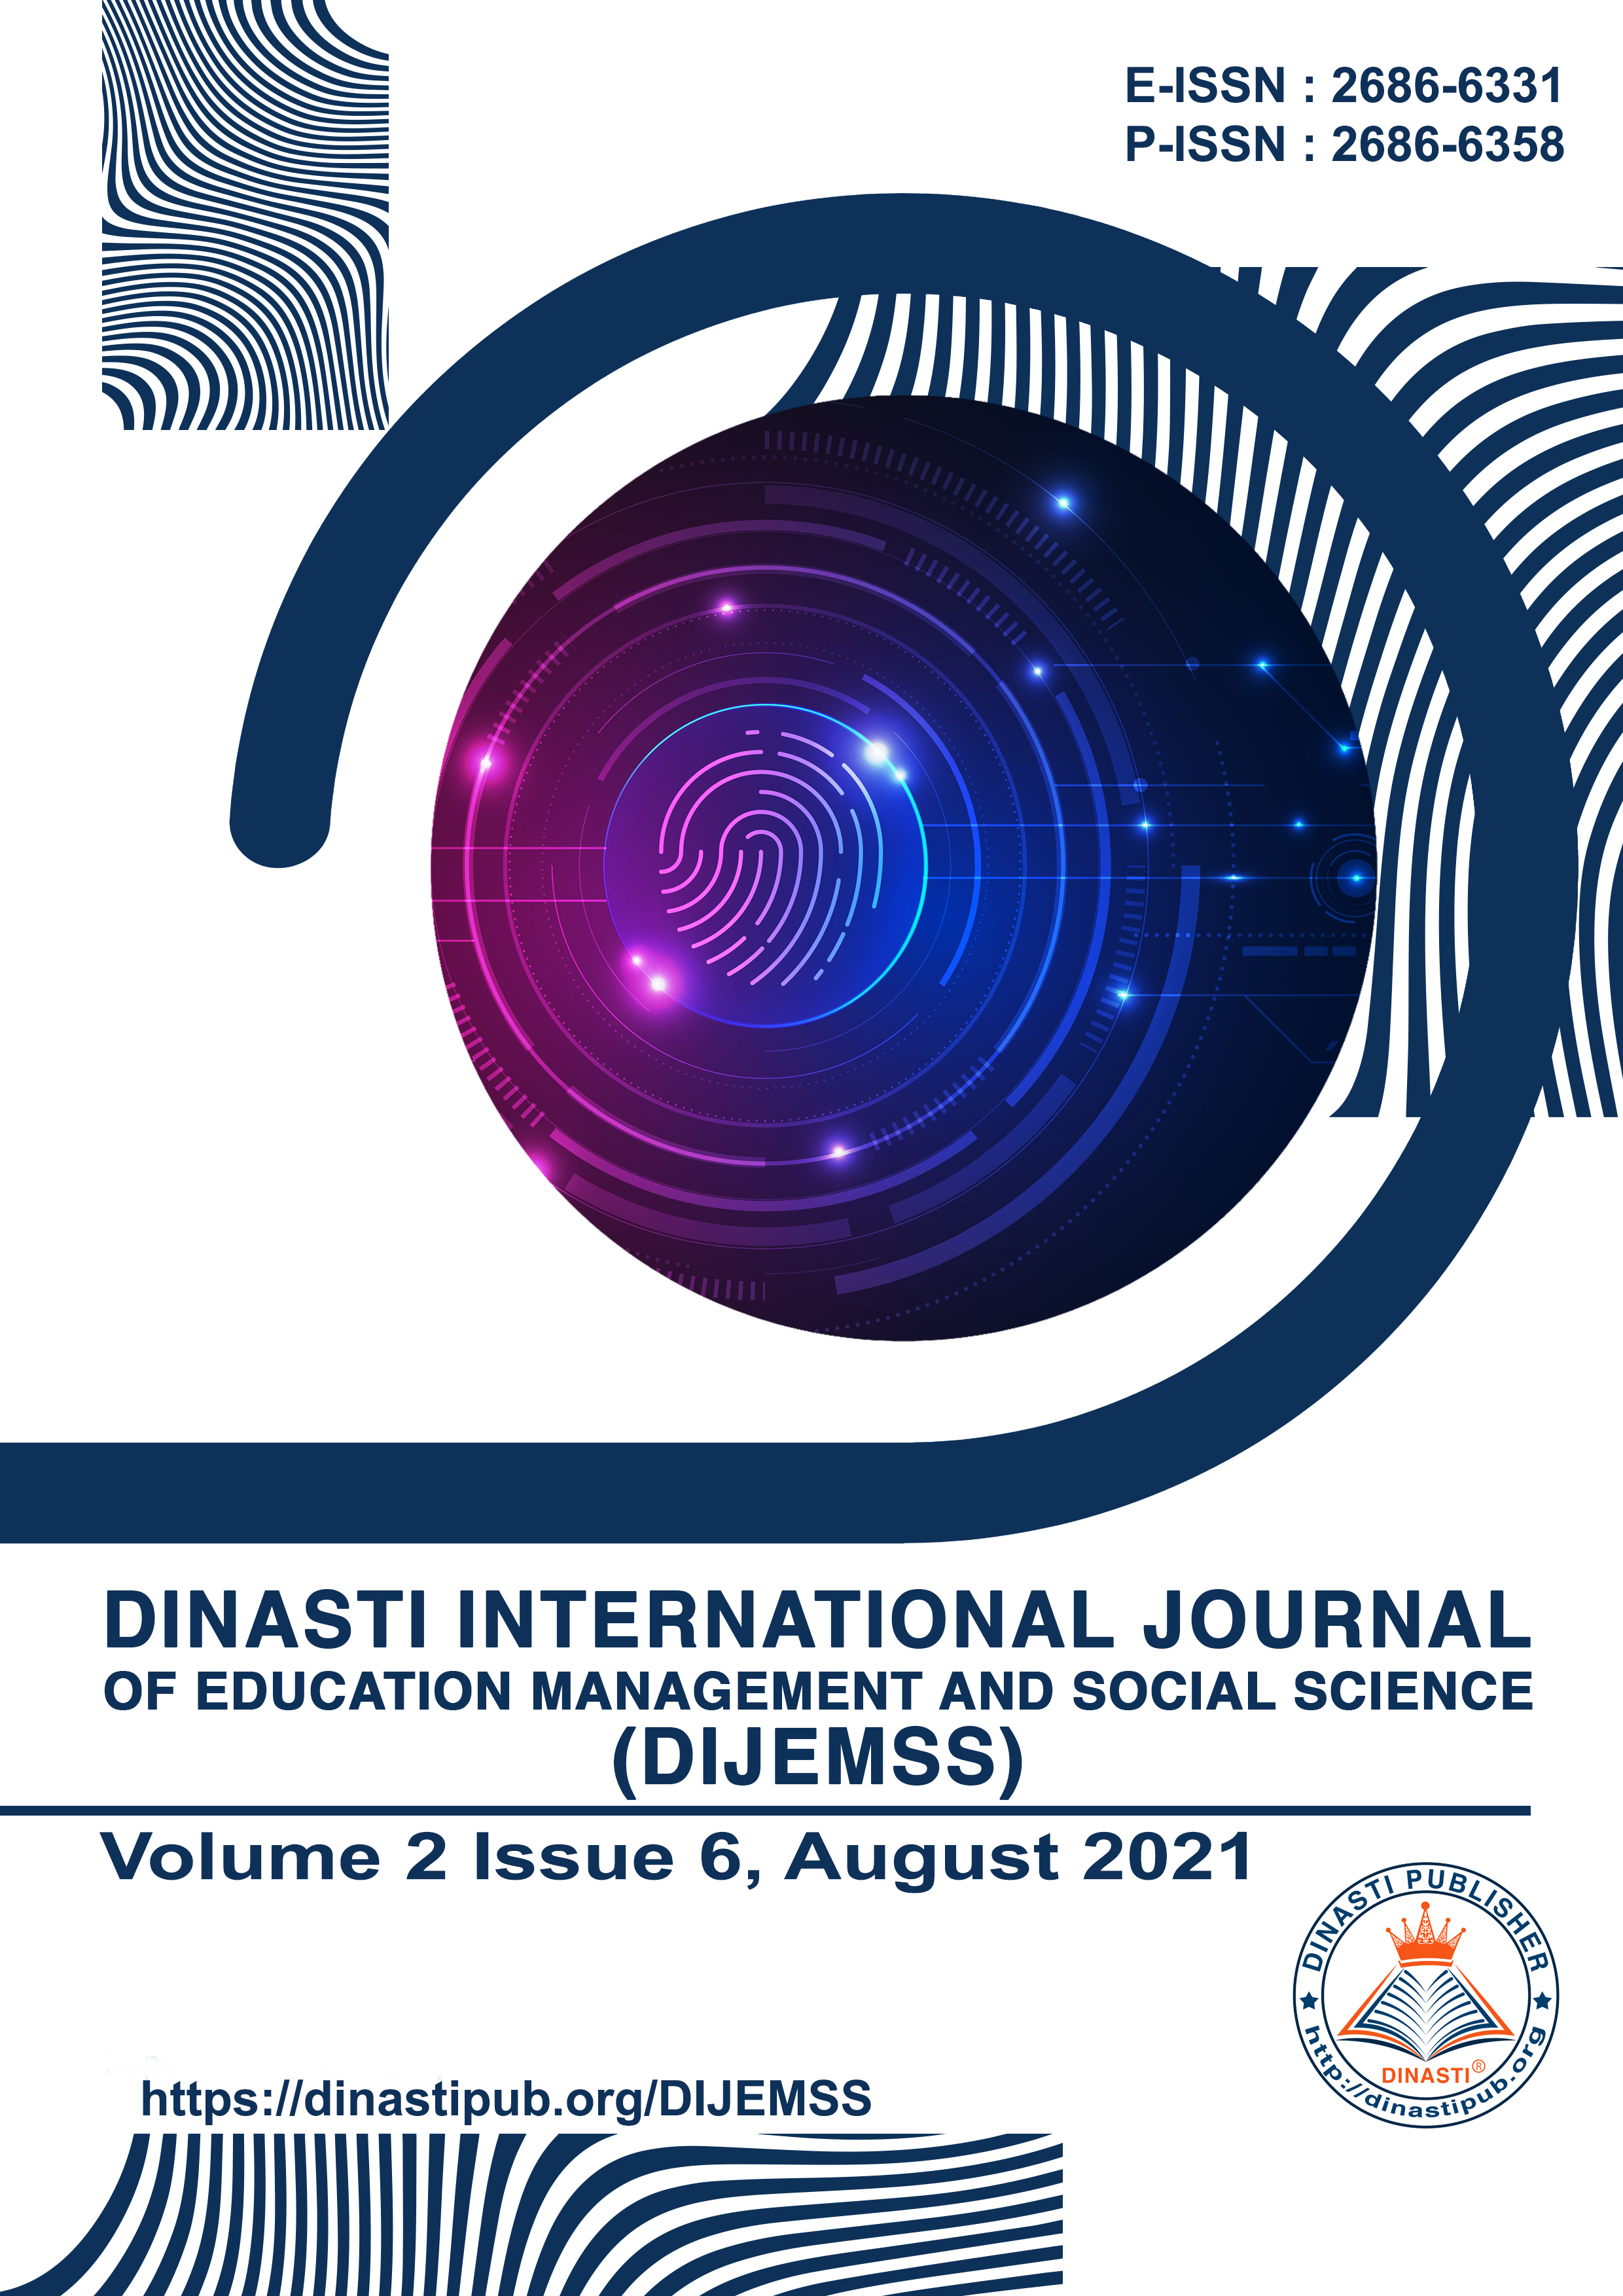 					View Vol. 2 No. 6 (2021): Dinasti International Journal of Education Management and Social Science (August - September 2021)
				